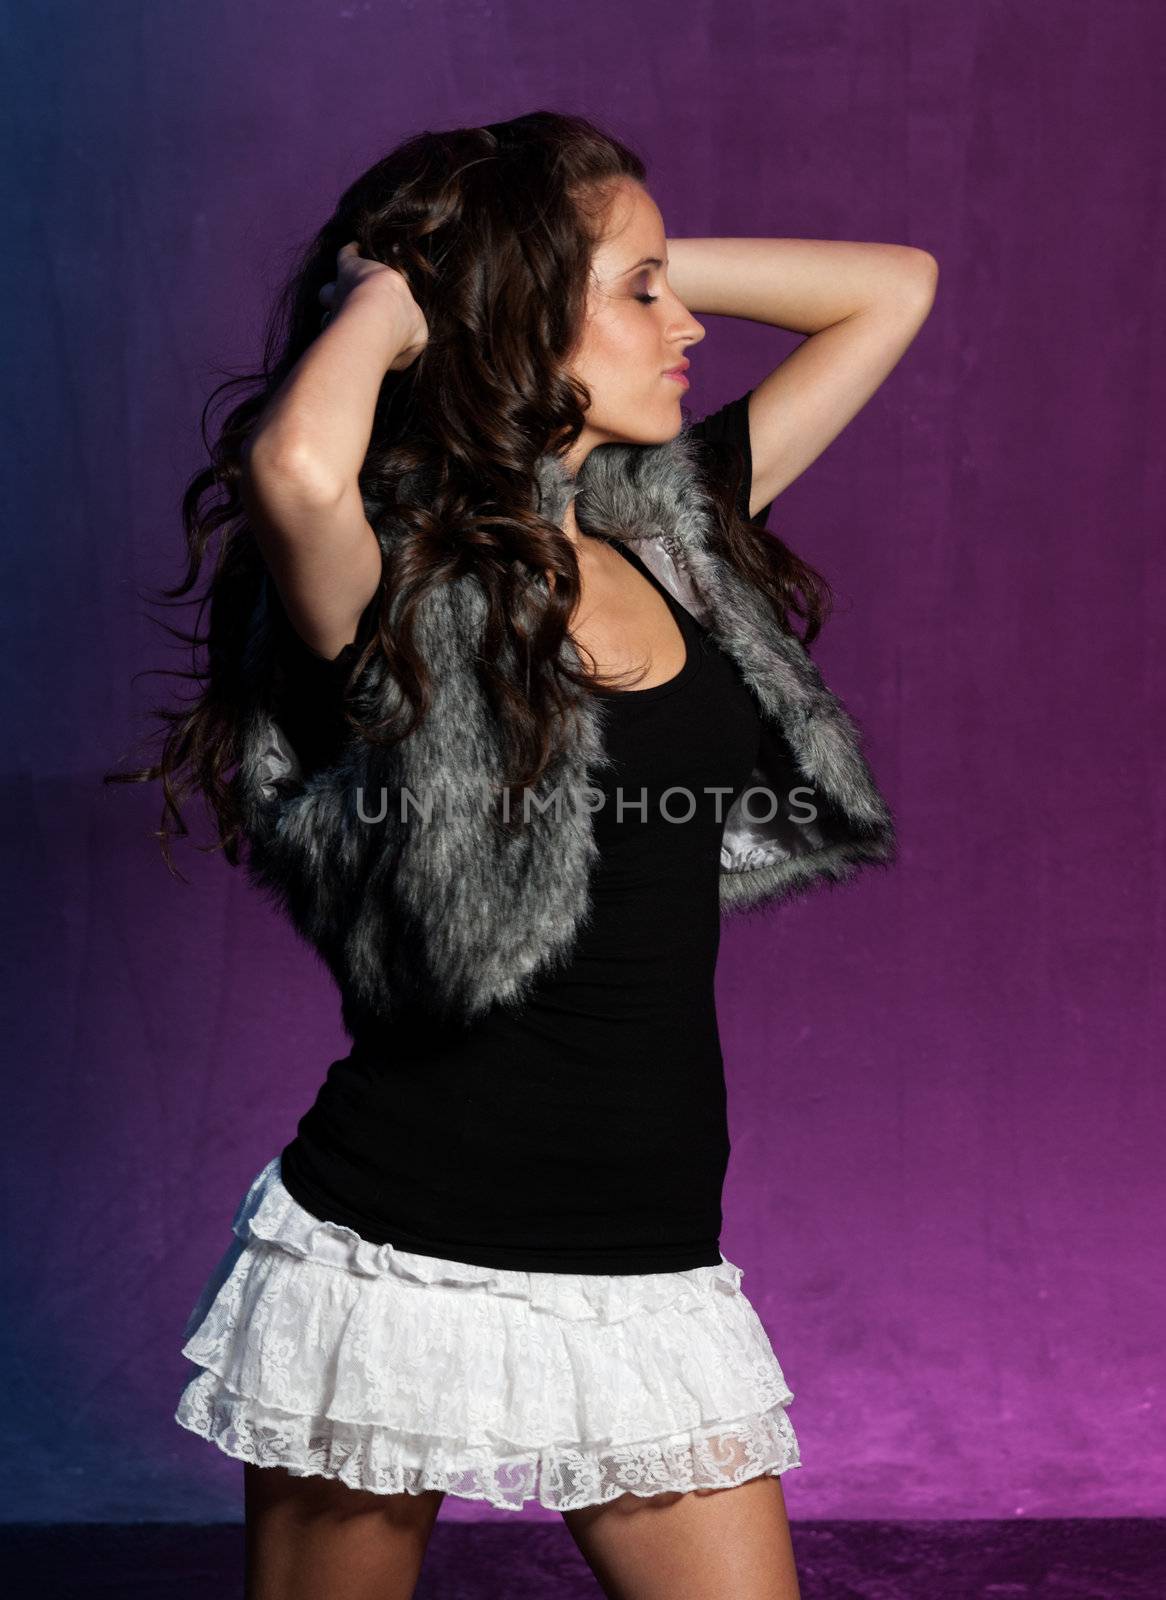 Young girl dancing on blue and purple background. 